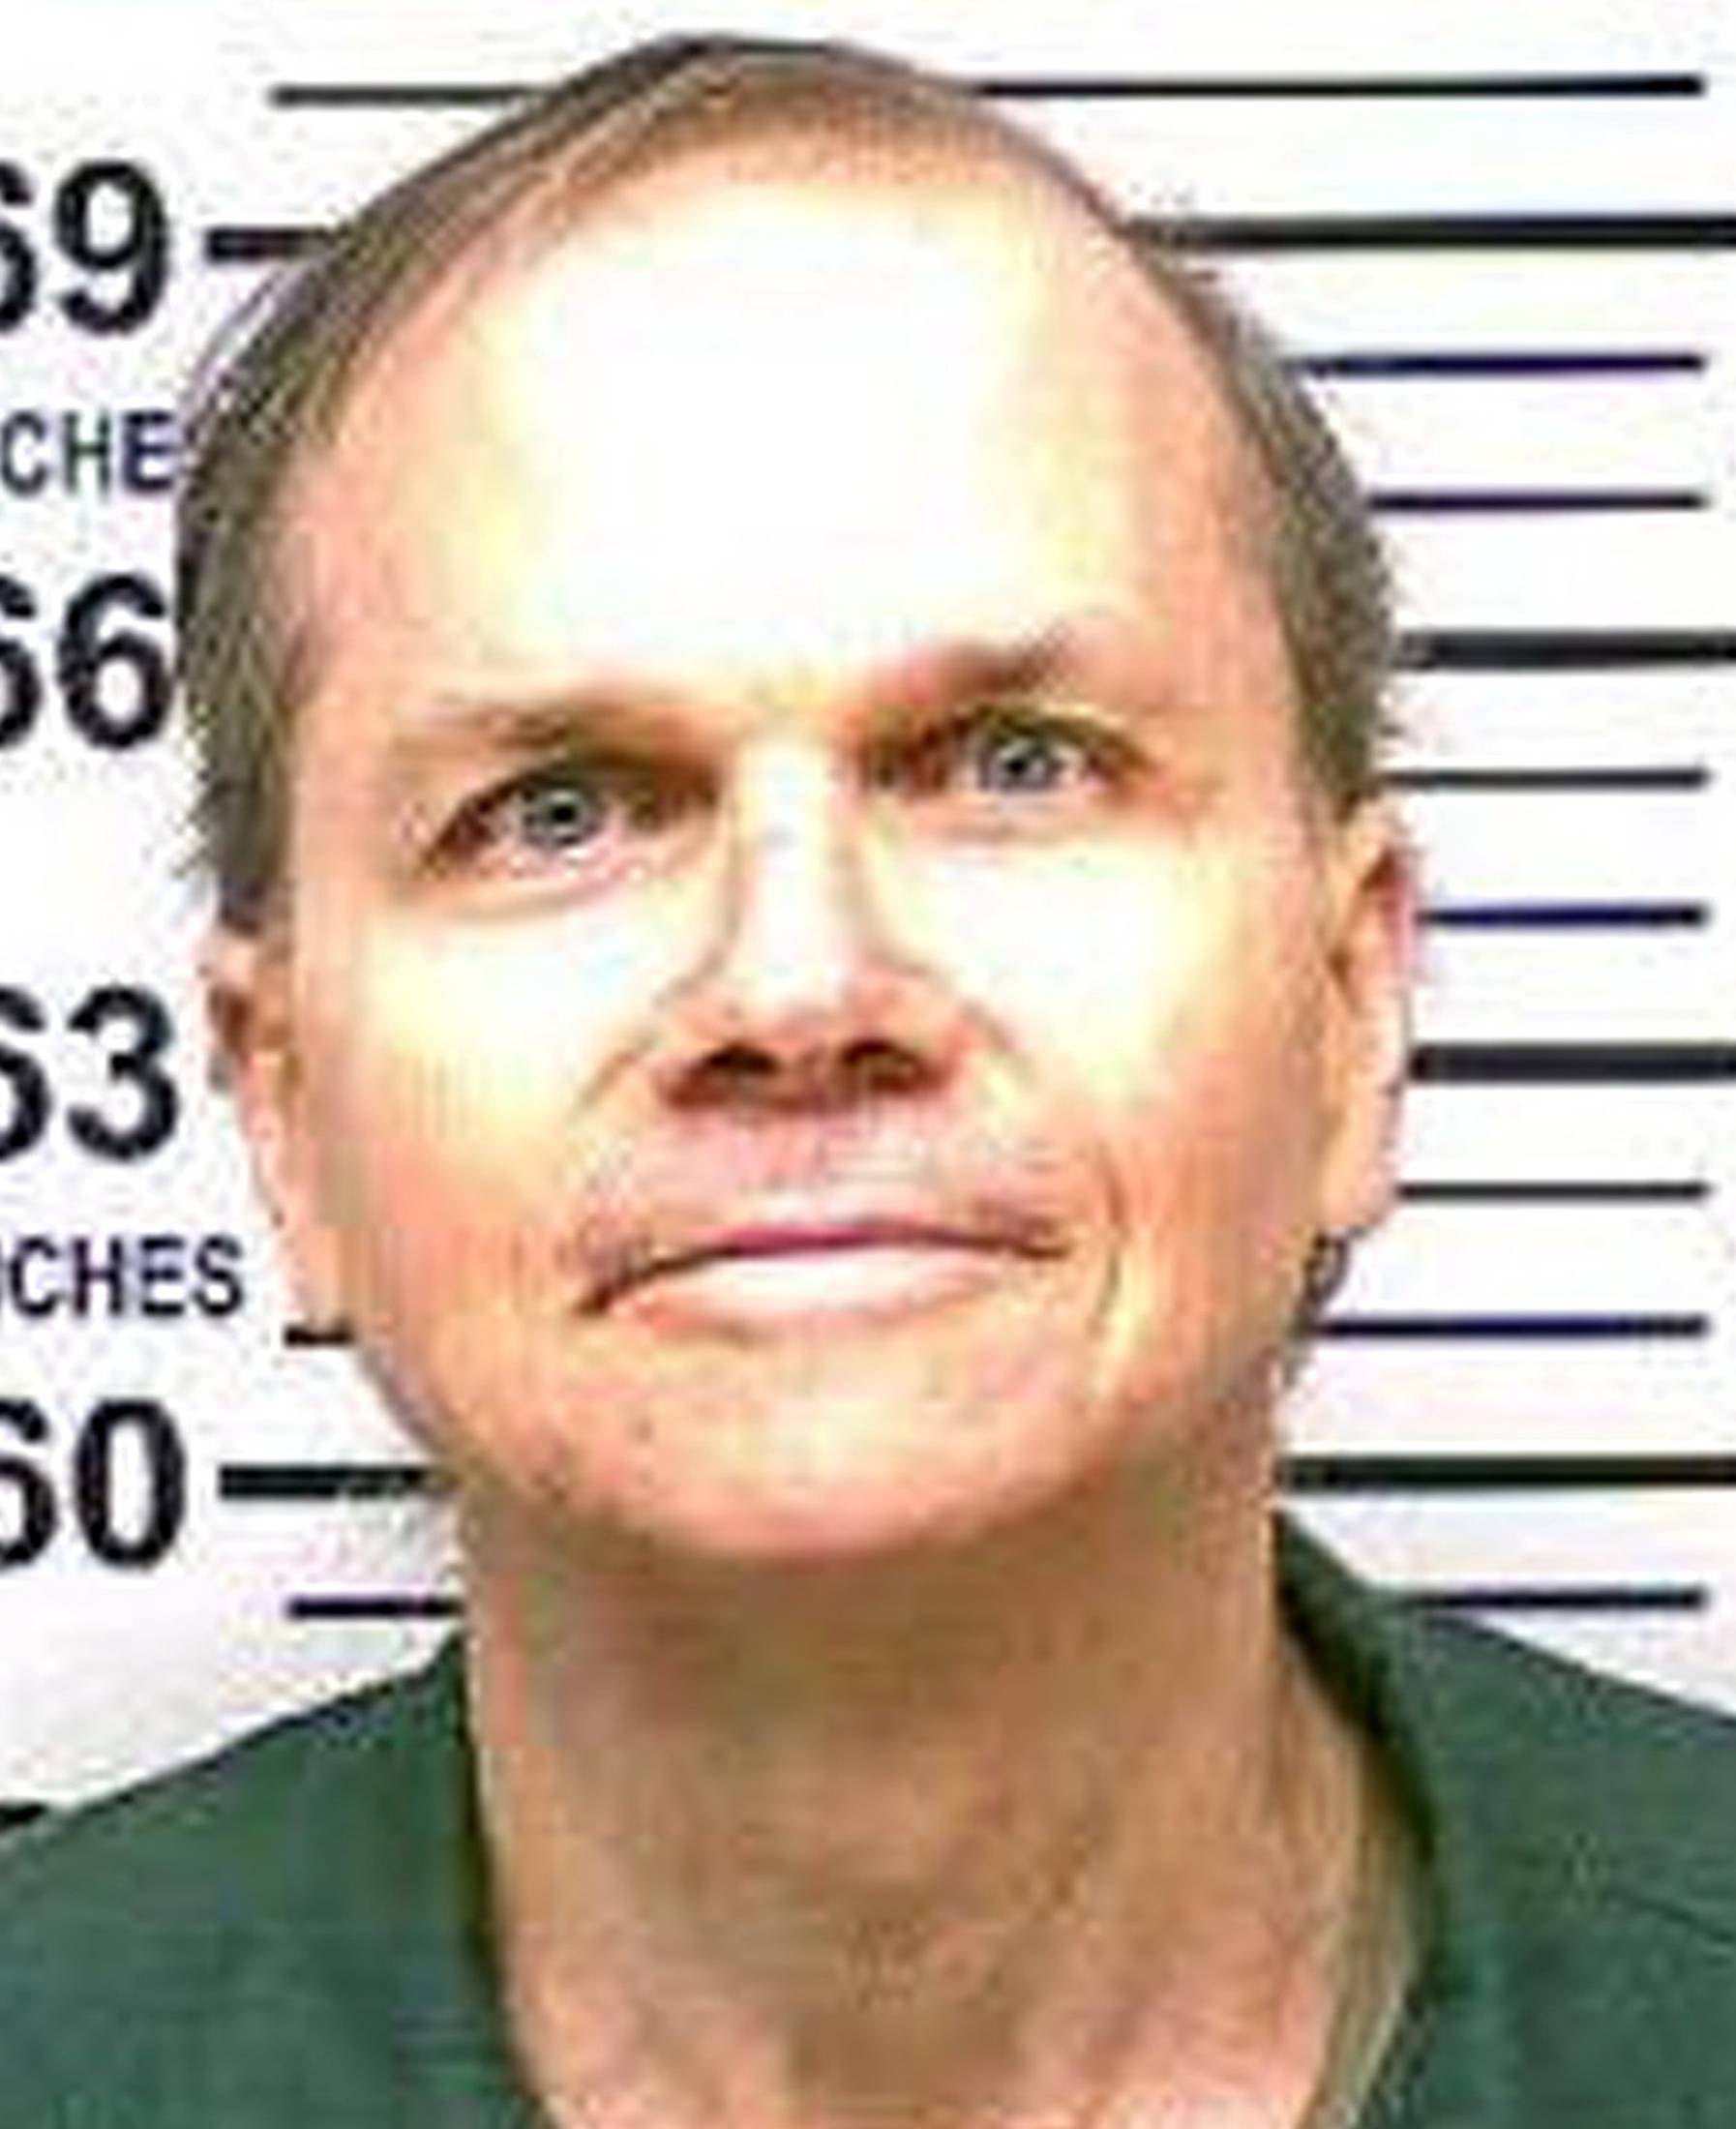 New York State Department of Corrections and Community Supervision 2018 photo of Mark David Chapman who murdered John Lennon in 1980